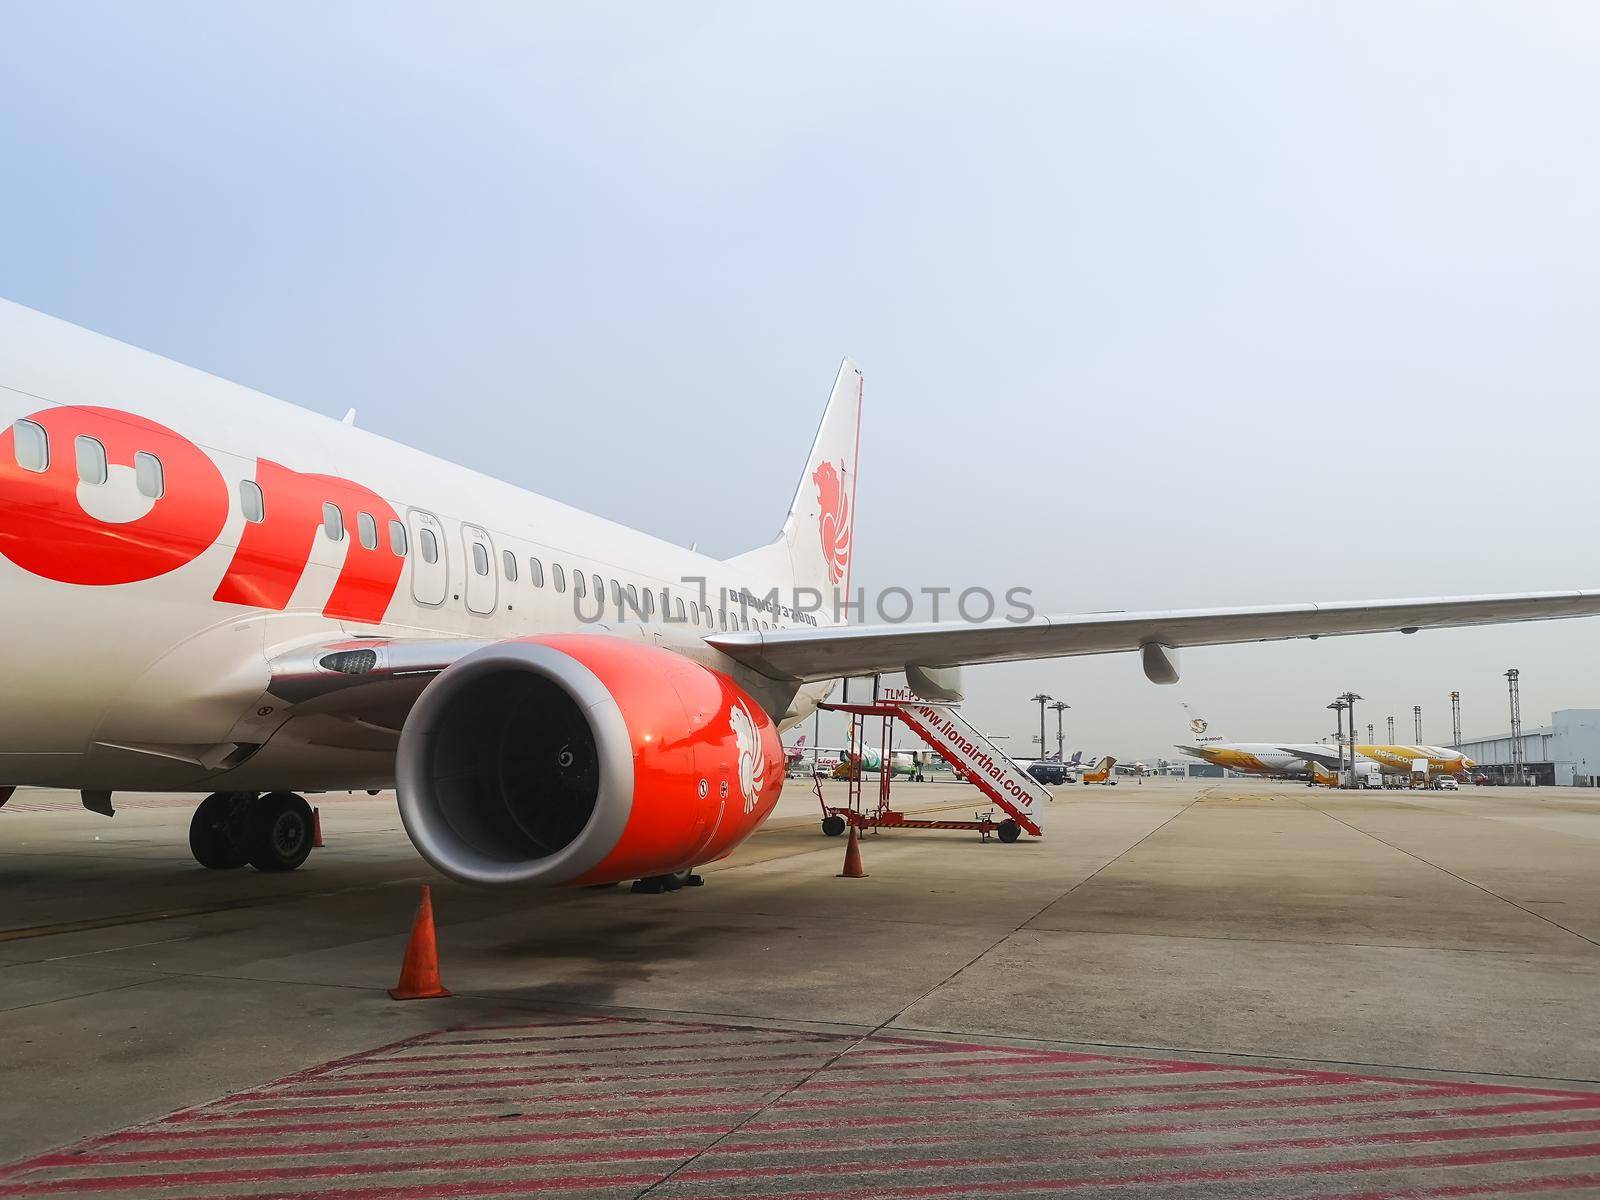 02 OCTOBER 2019, Lion air flying from chiang rai to bangkok in Thailand by Wmpix